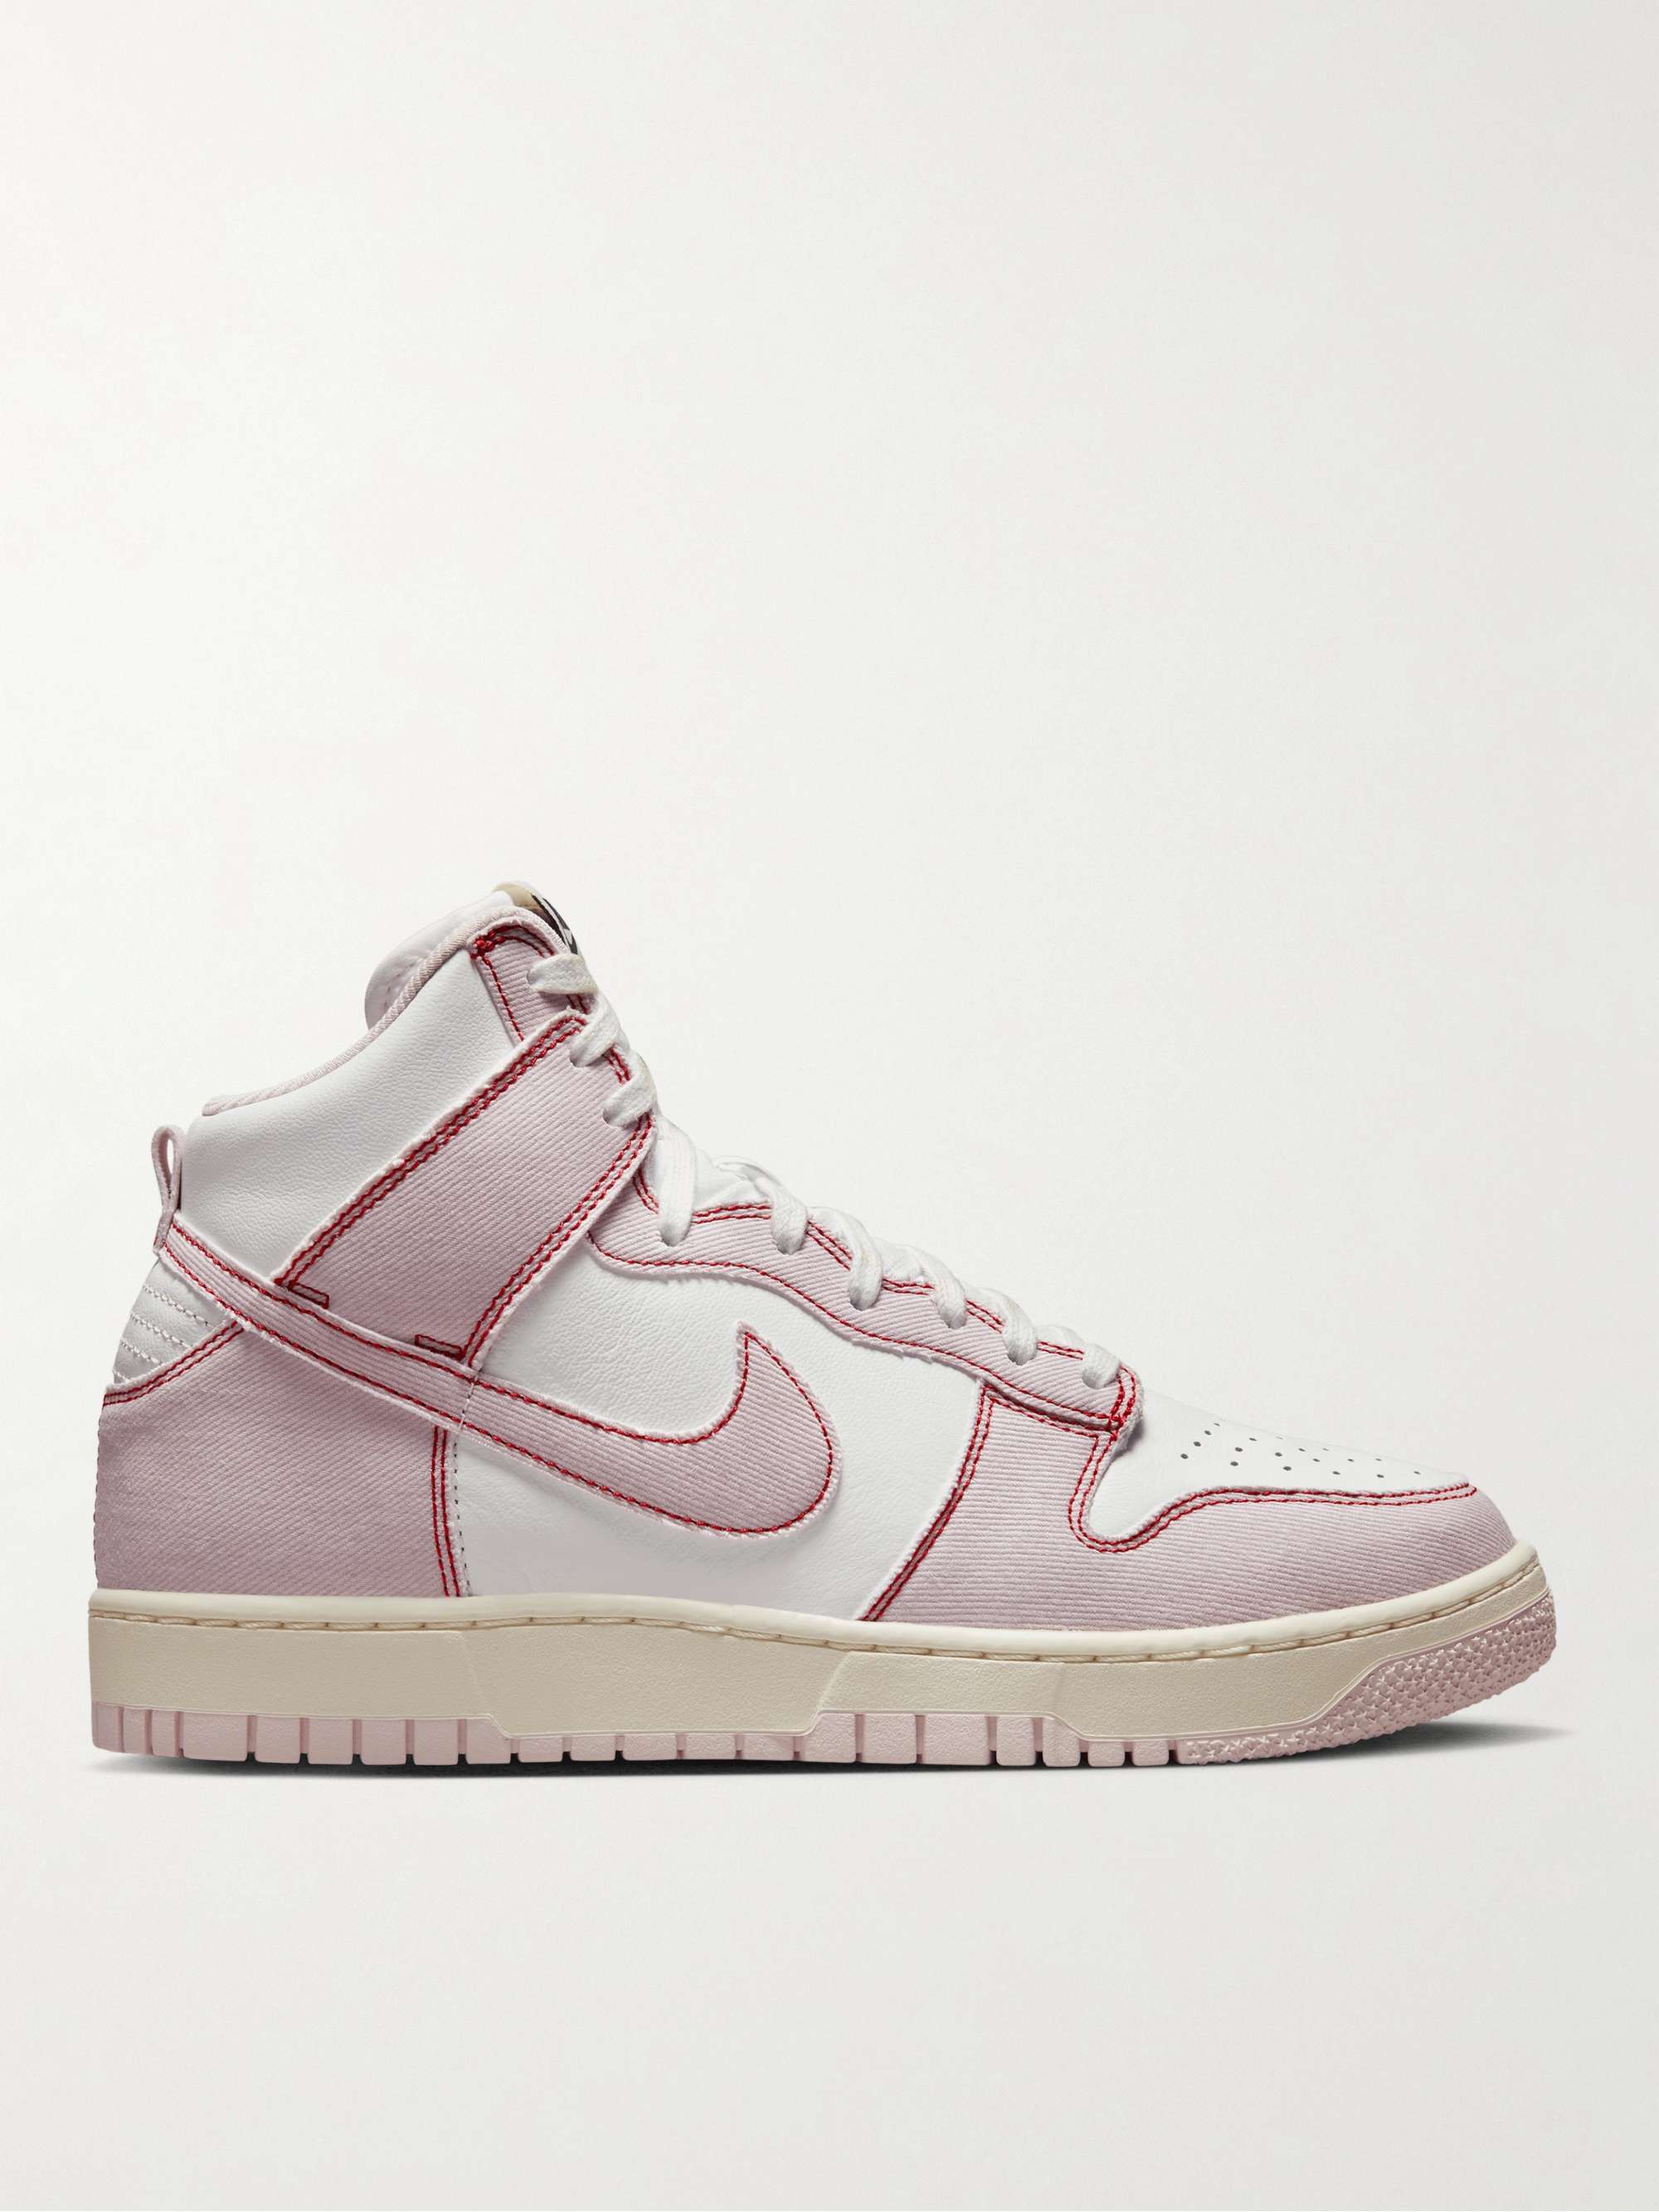 White Dunk Hi 1985 Leather and Denim Sneakers | NIKE | MR PORTER